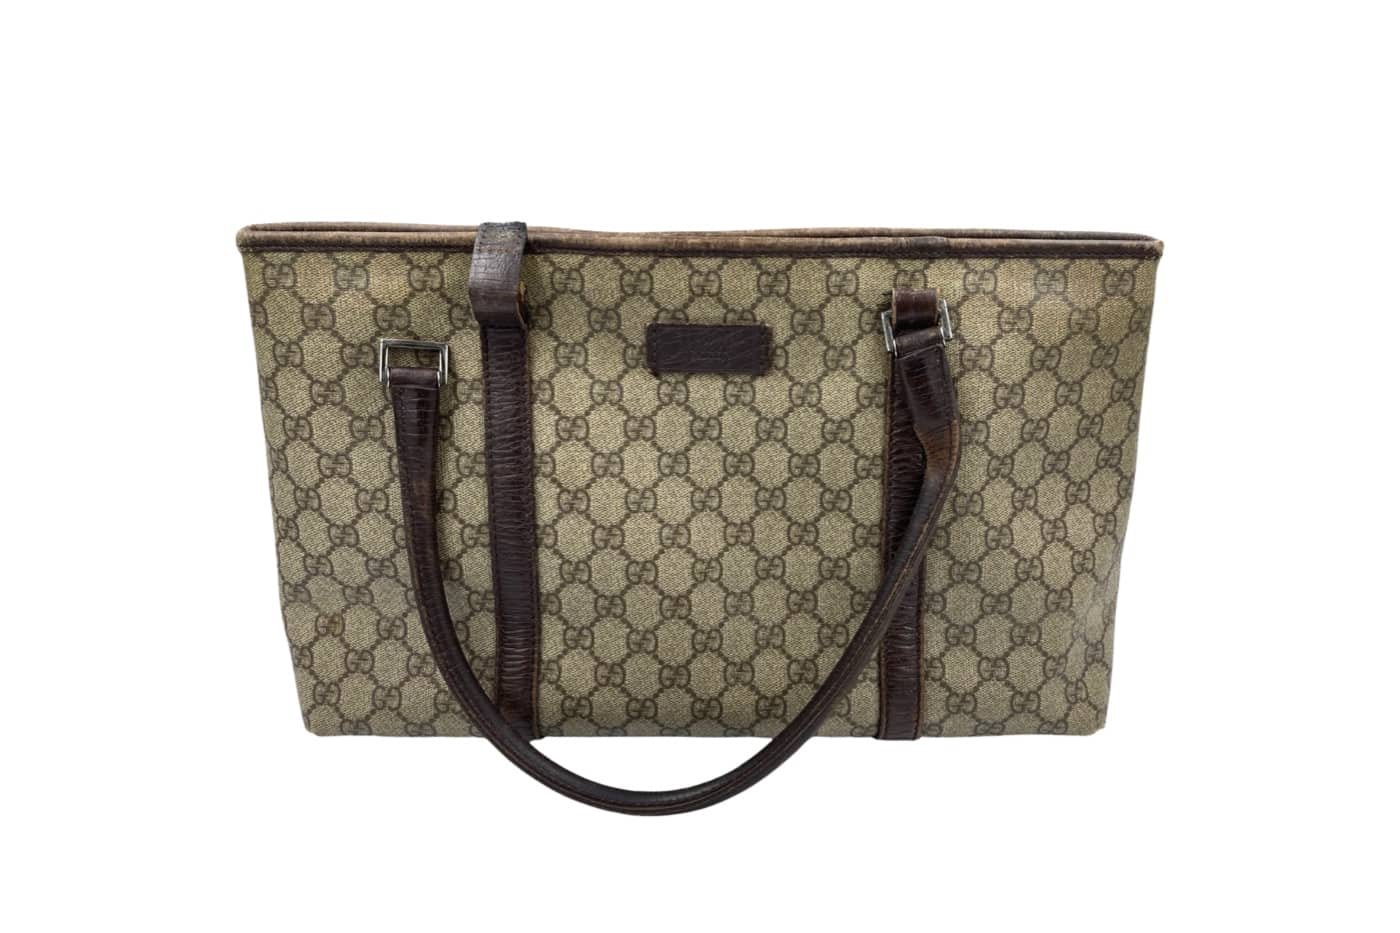 Gucci Bag Corner Protection & Binding Replacement — SoleHeeled